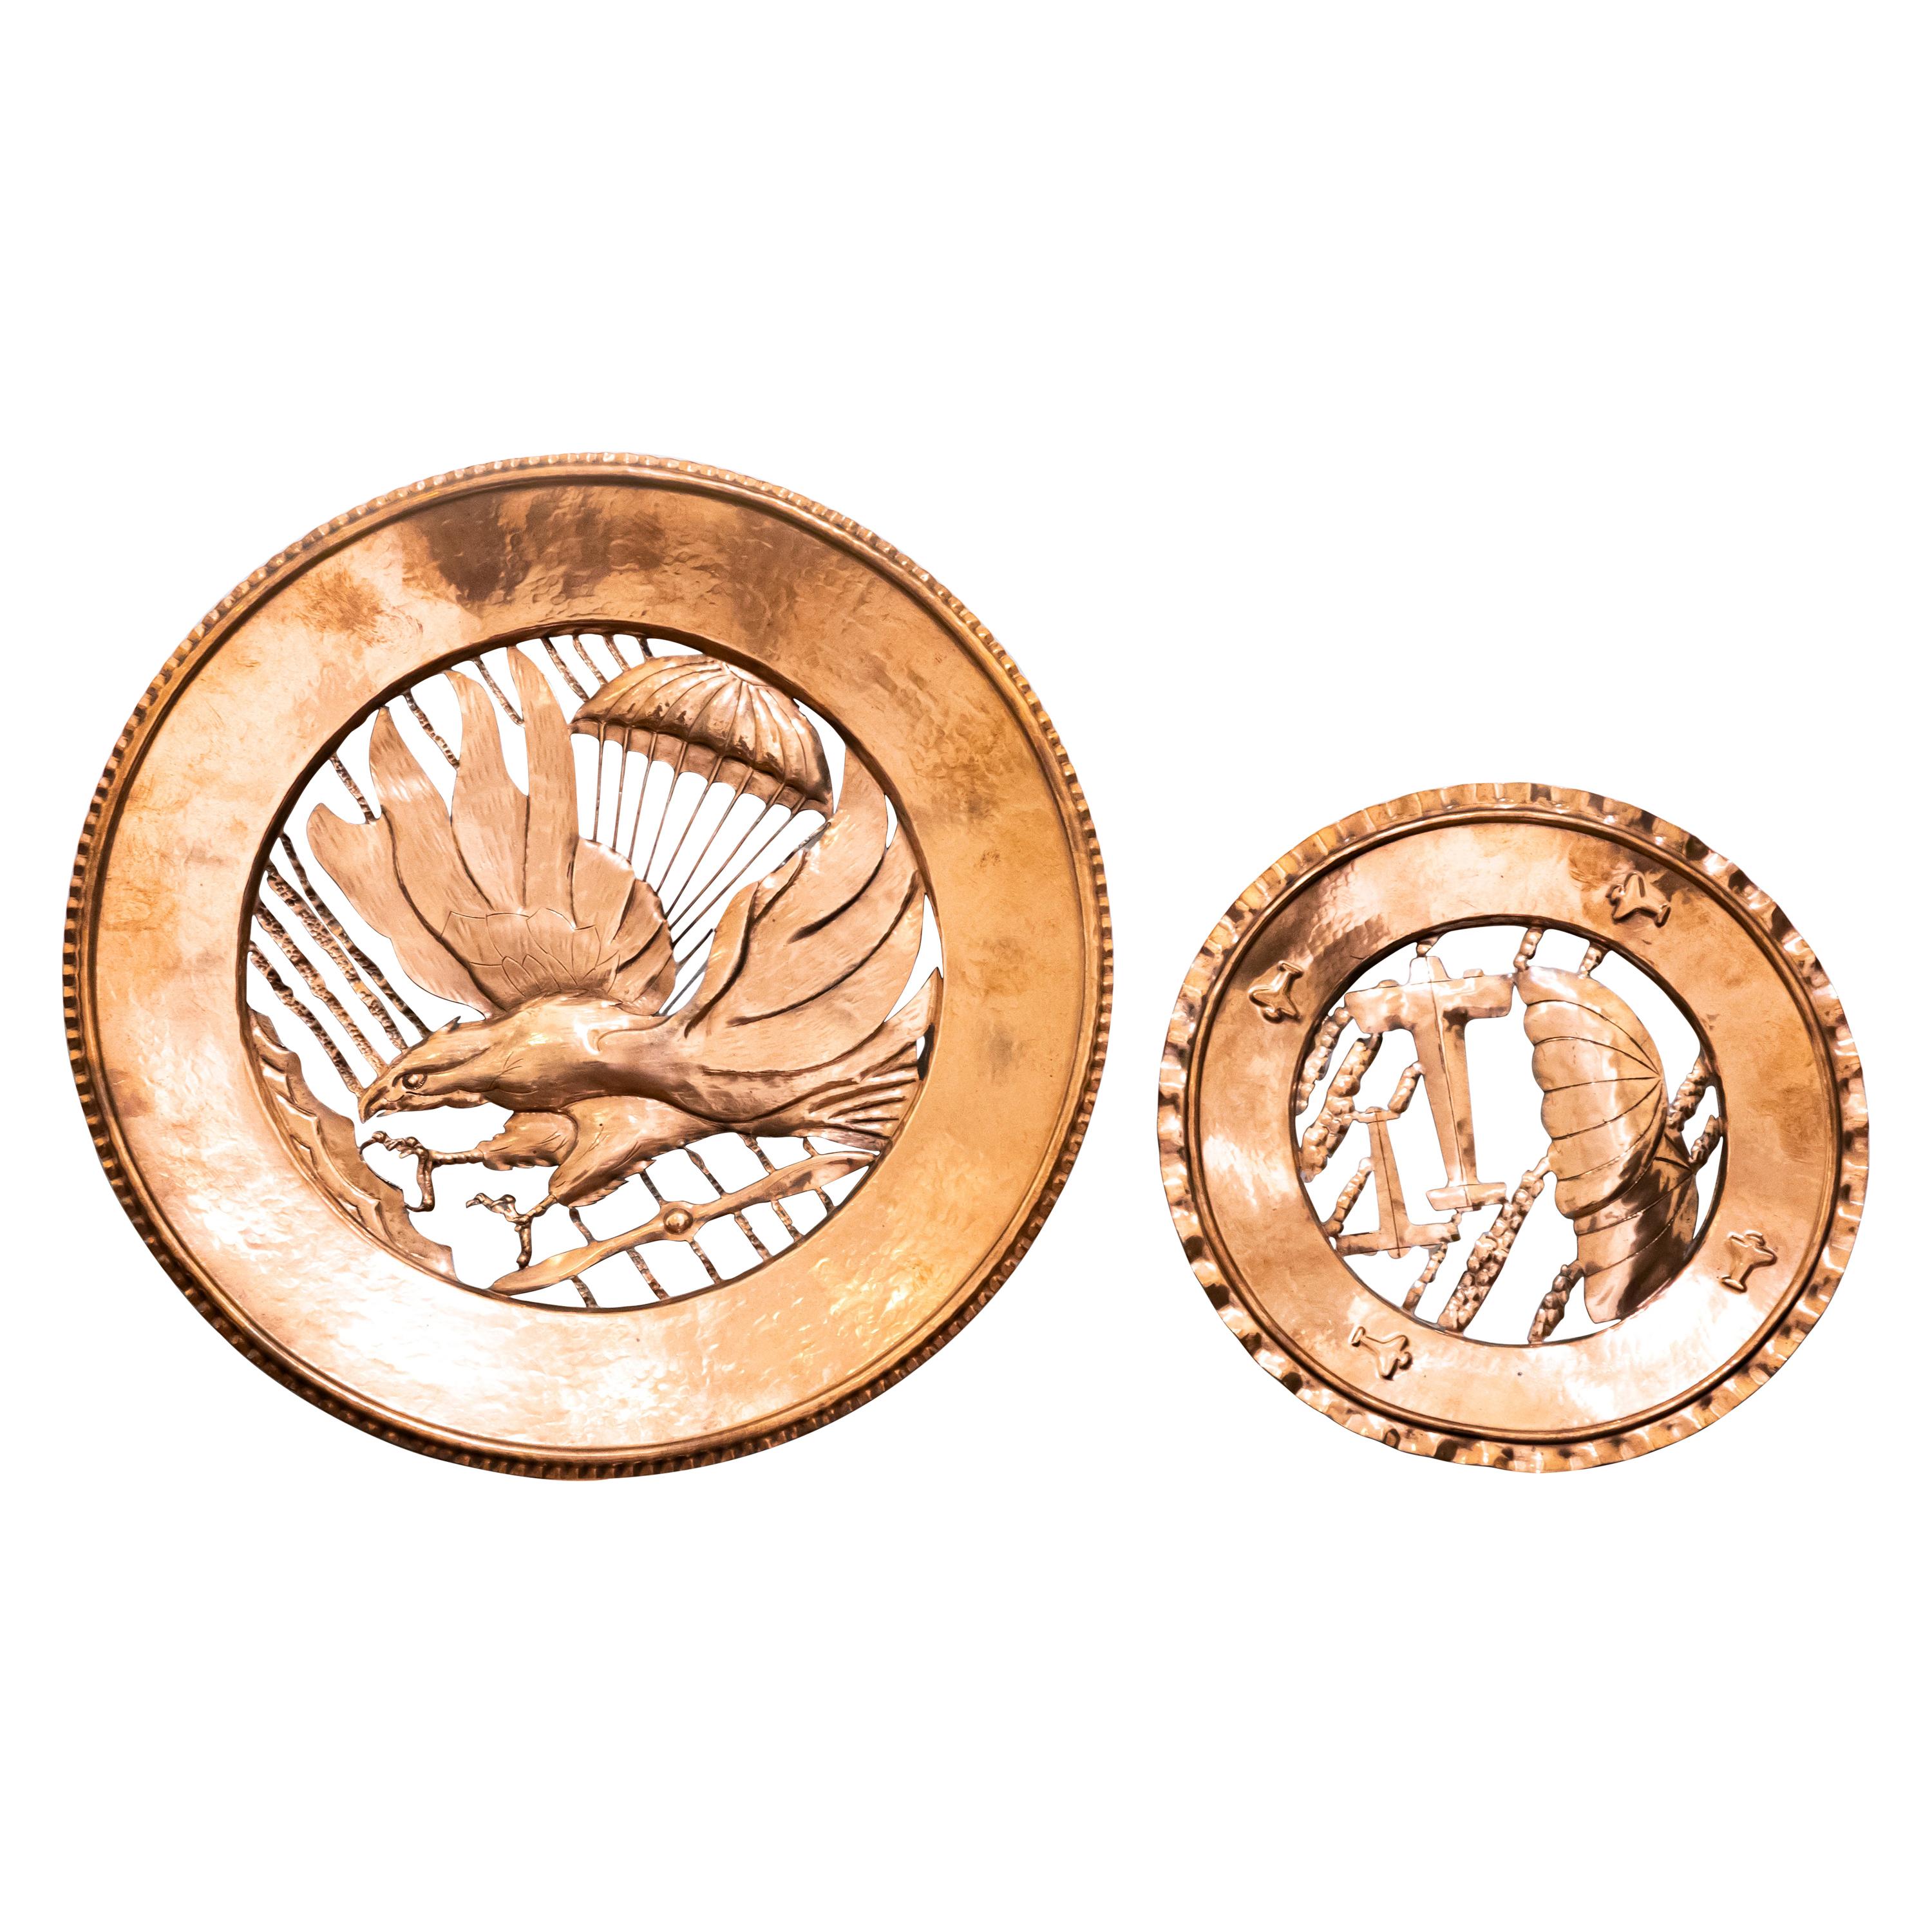 Pair of Vintage Copper Decorative Plates, Italy, 1930s